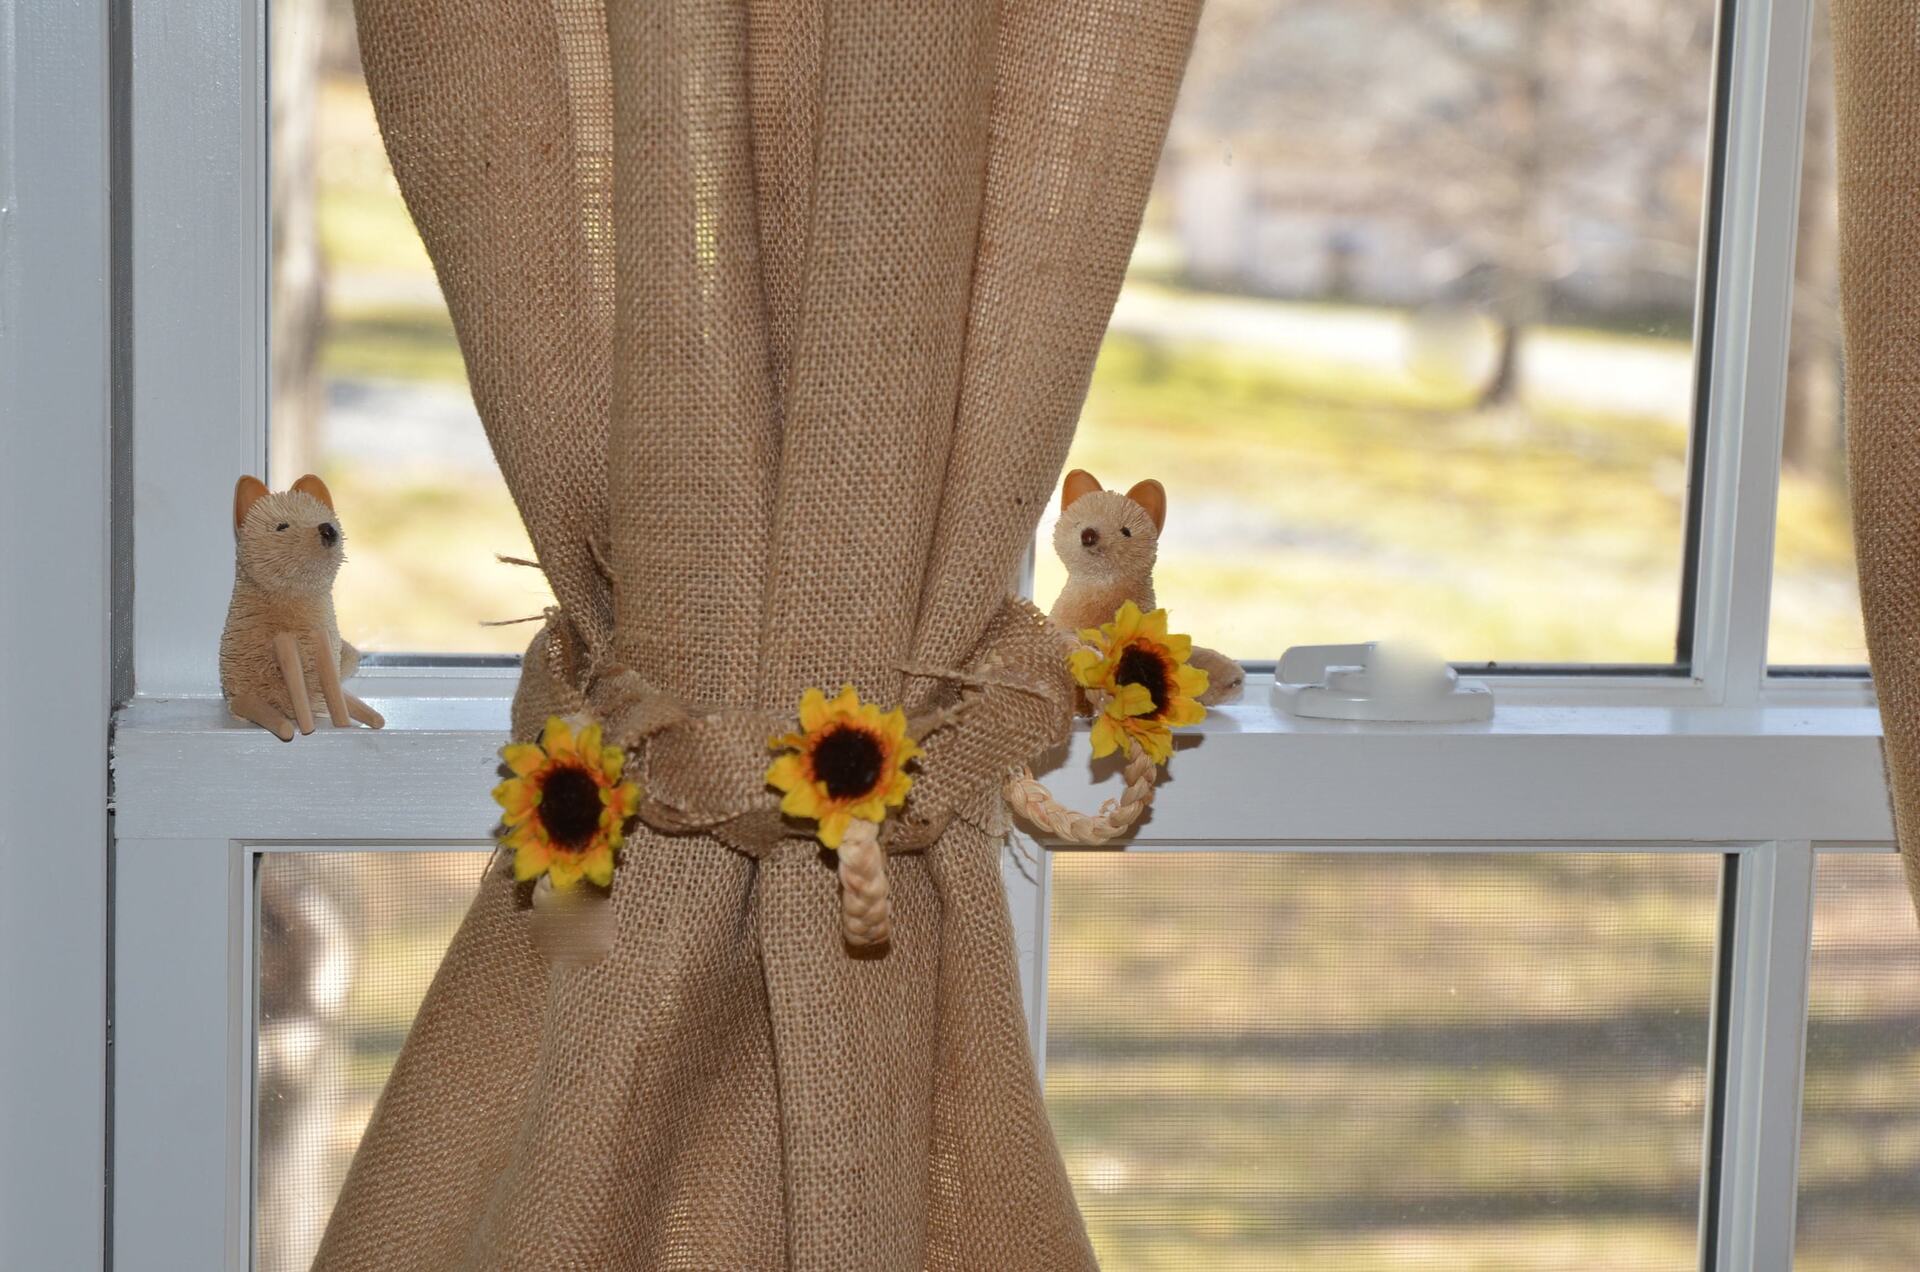 How To Make Curtains Out Of Burlap